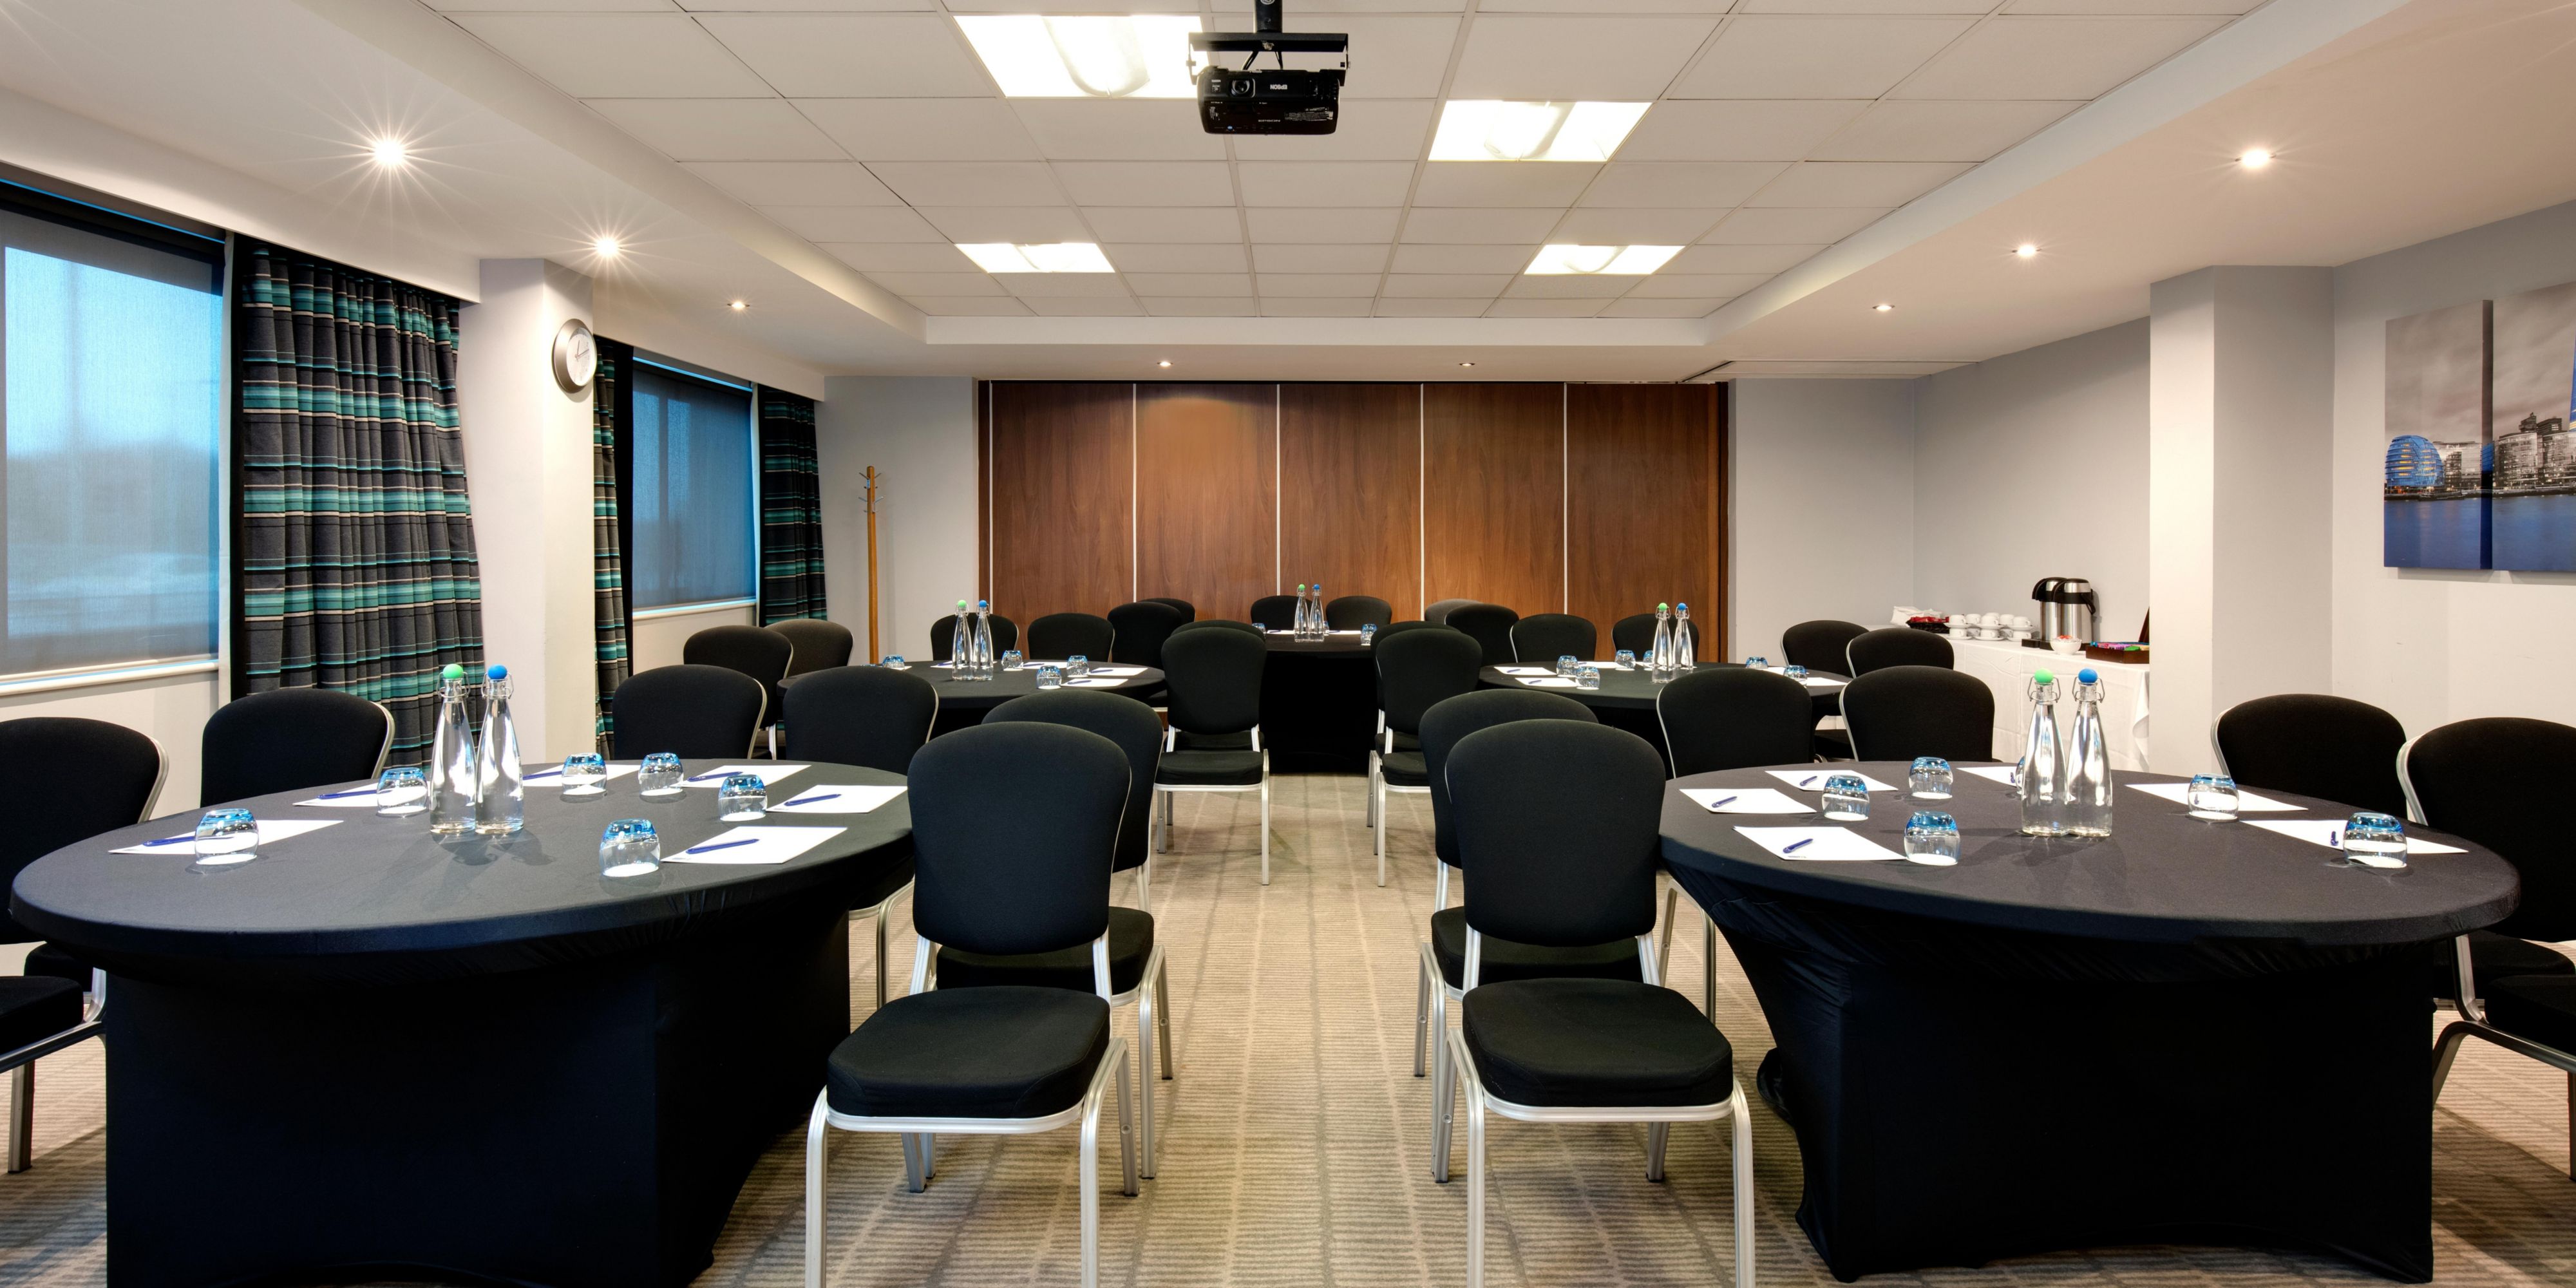 7 versatile and air-conditioned rooms to provide the ideal setting for any event ideal from training courses, business meetings and private events. All rooms are equipped with screen and LCD projector and complimentary Wi-Fi. Maximum capacity up to 120 delegates.